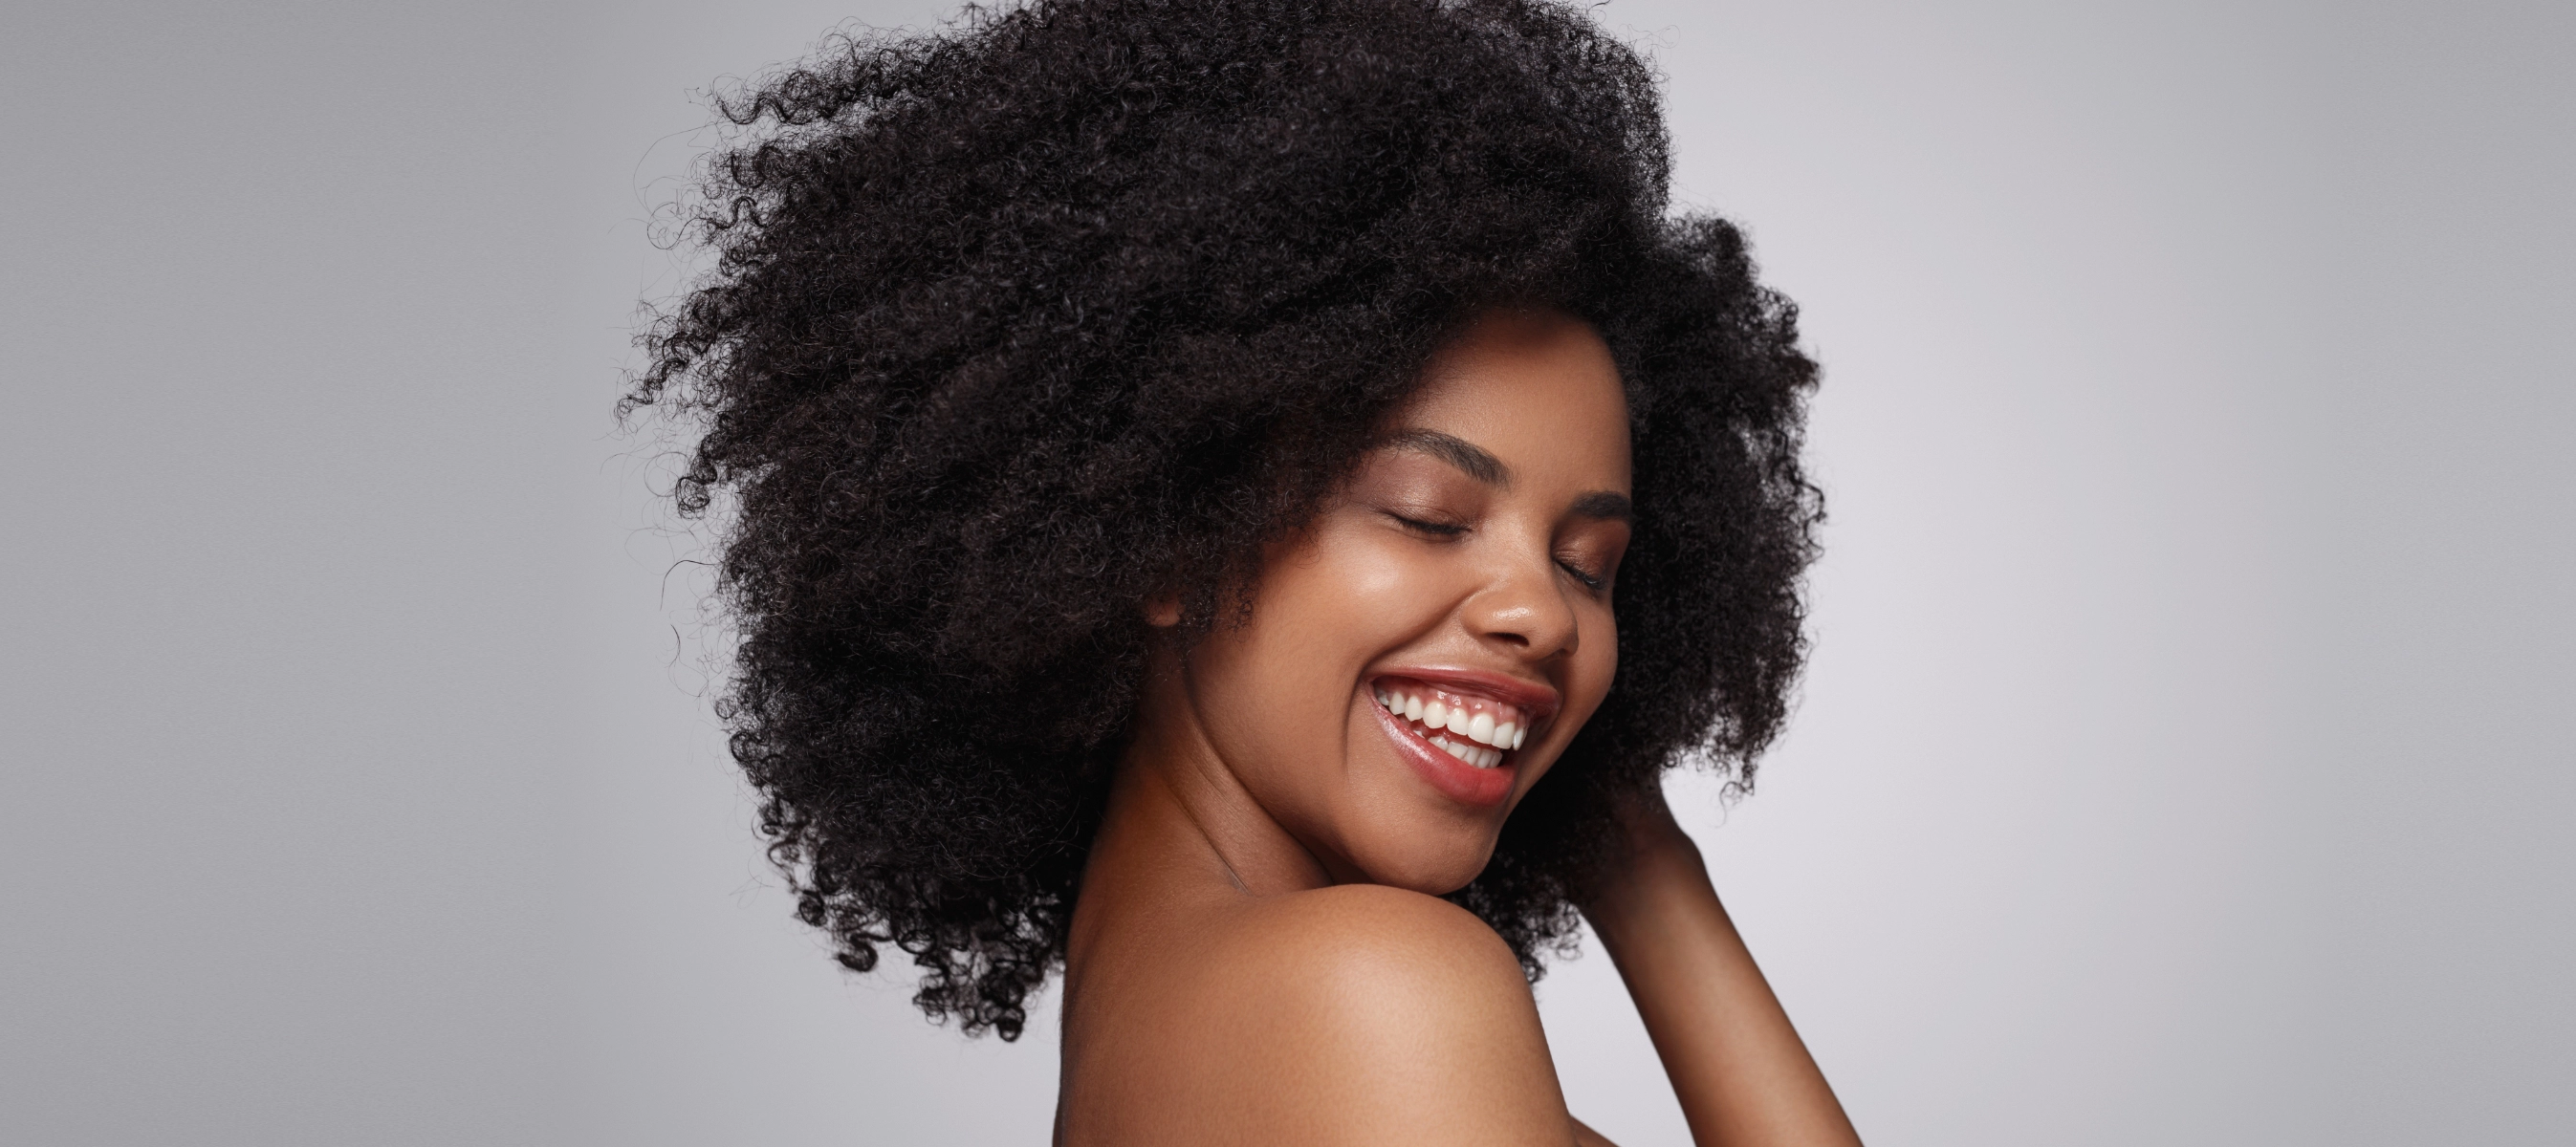 african american woman smiling with her eyes closed as her hand runs through her 4a type curly hair